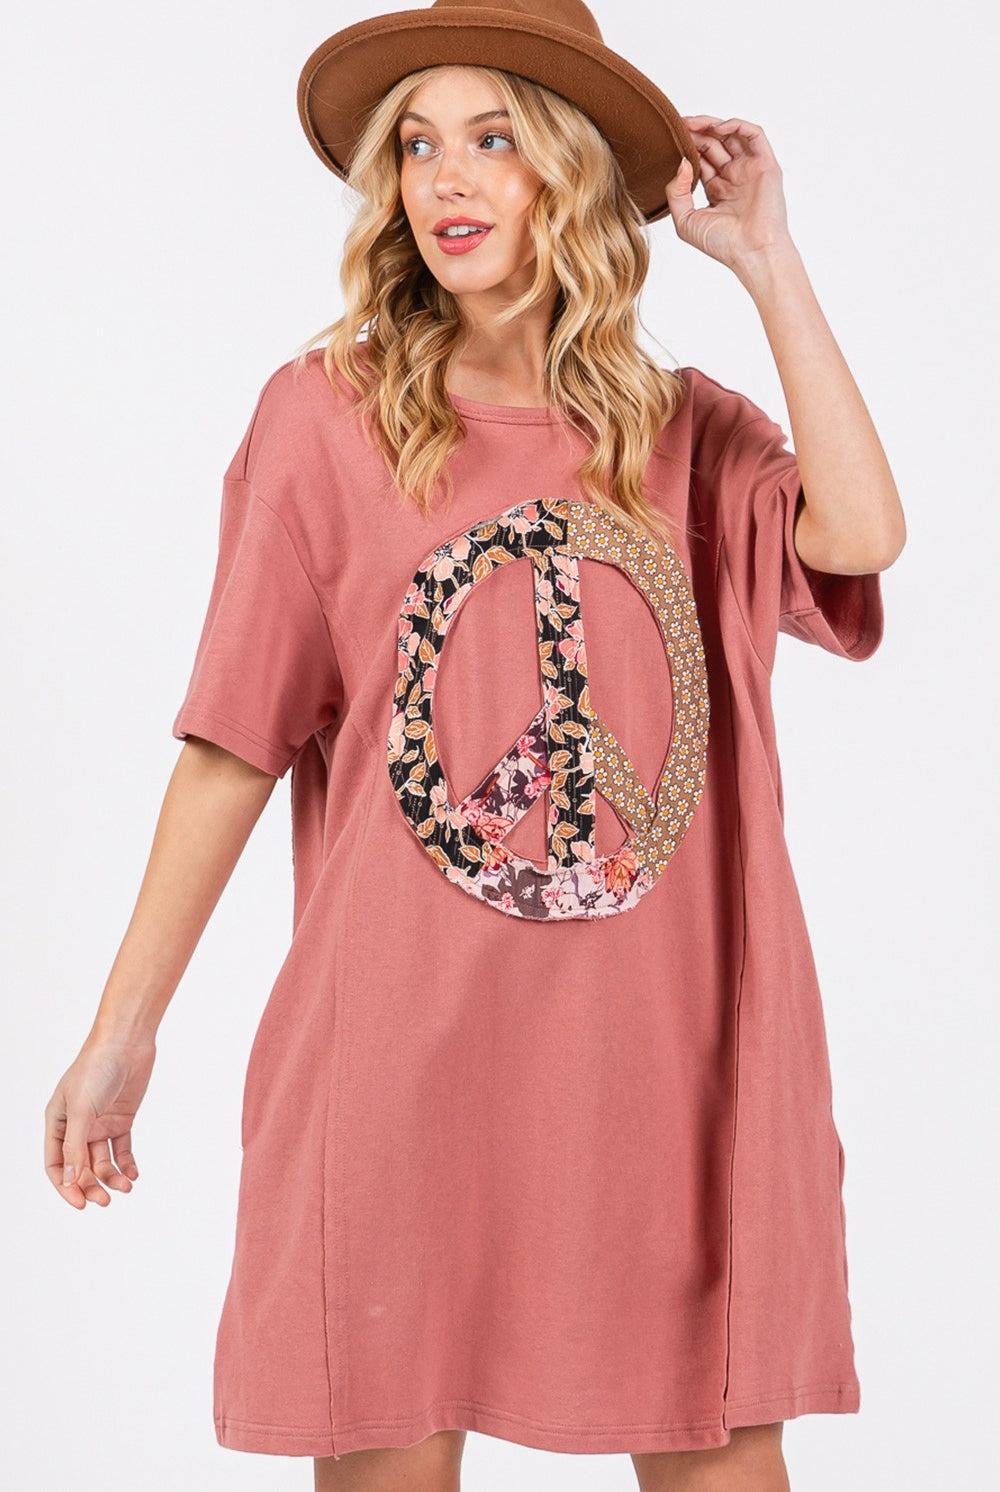 Woman wearing a casual short sleeve tee dress with a peace sign applique.